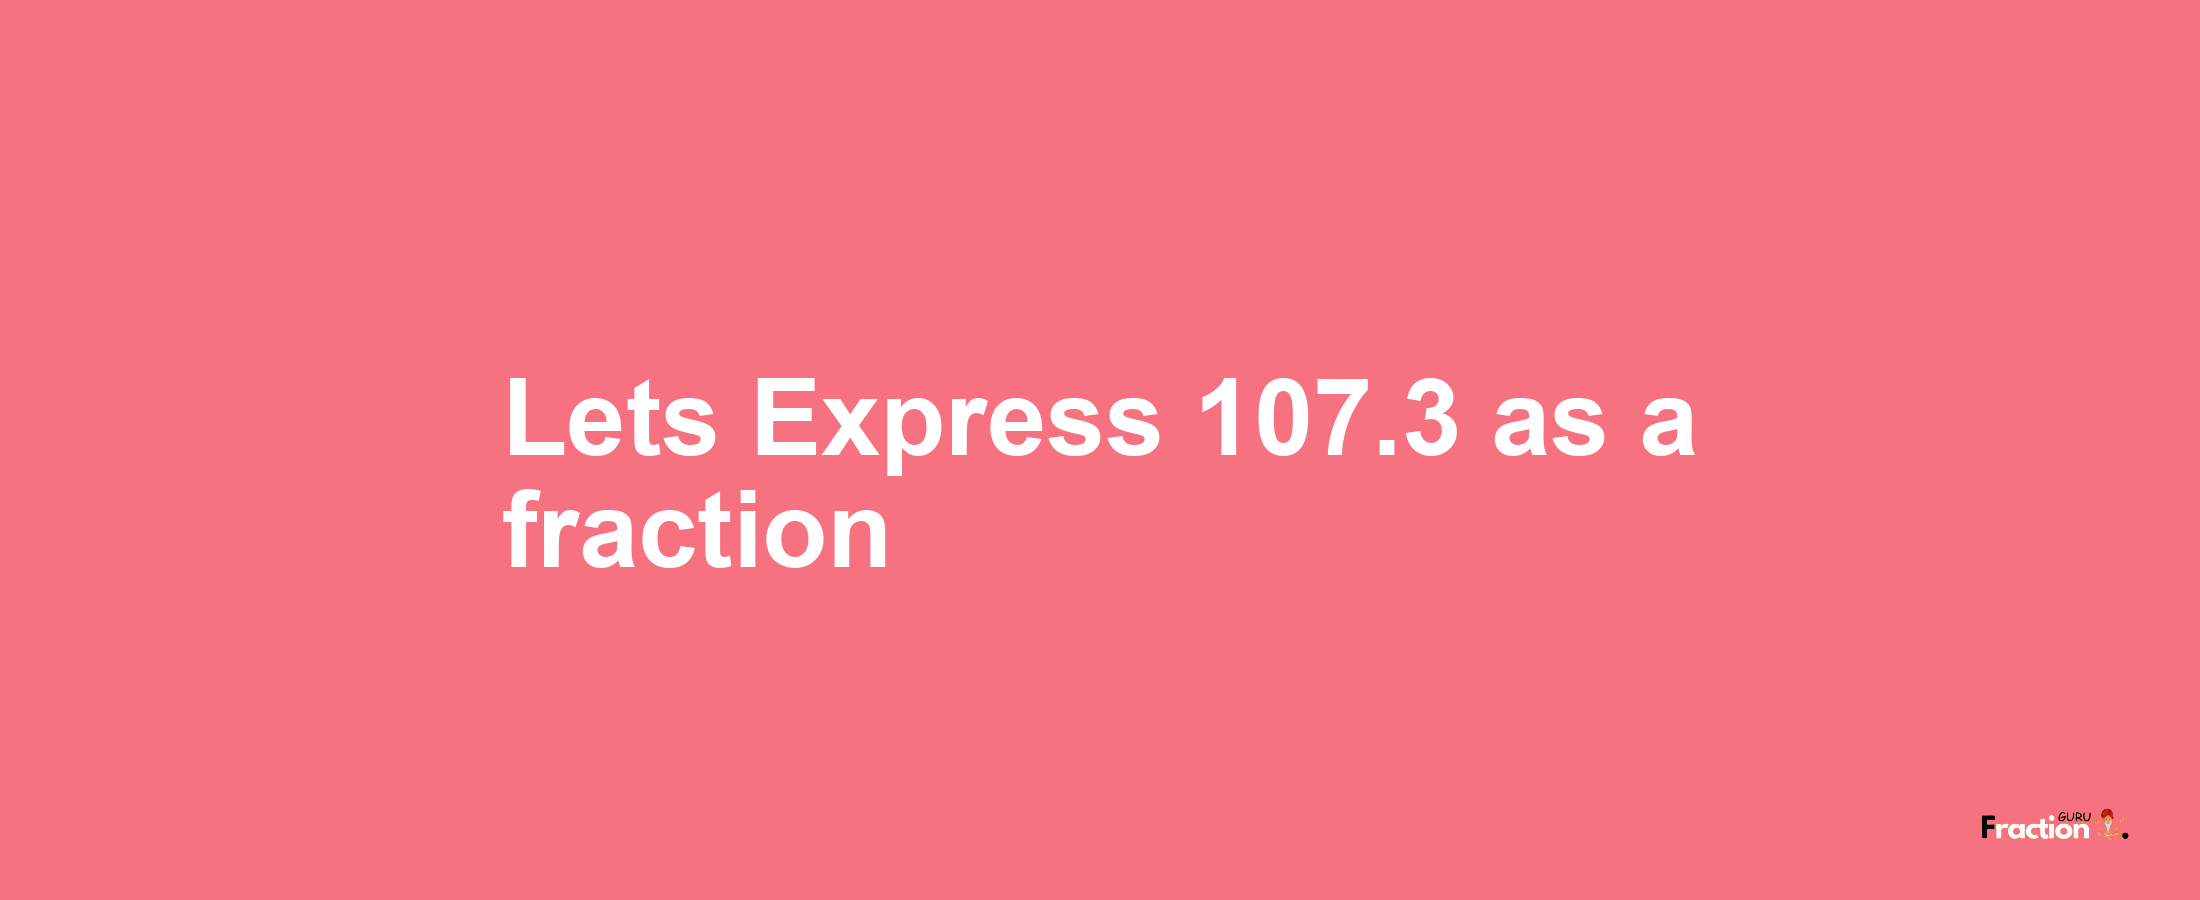 Lets Express 107.3 as afraction